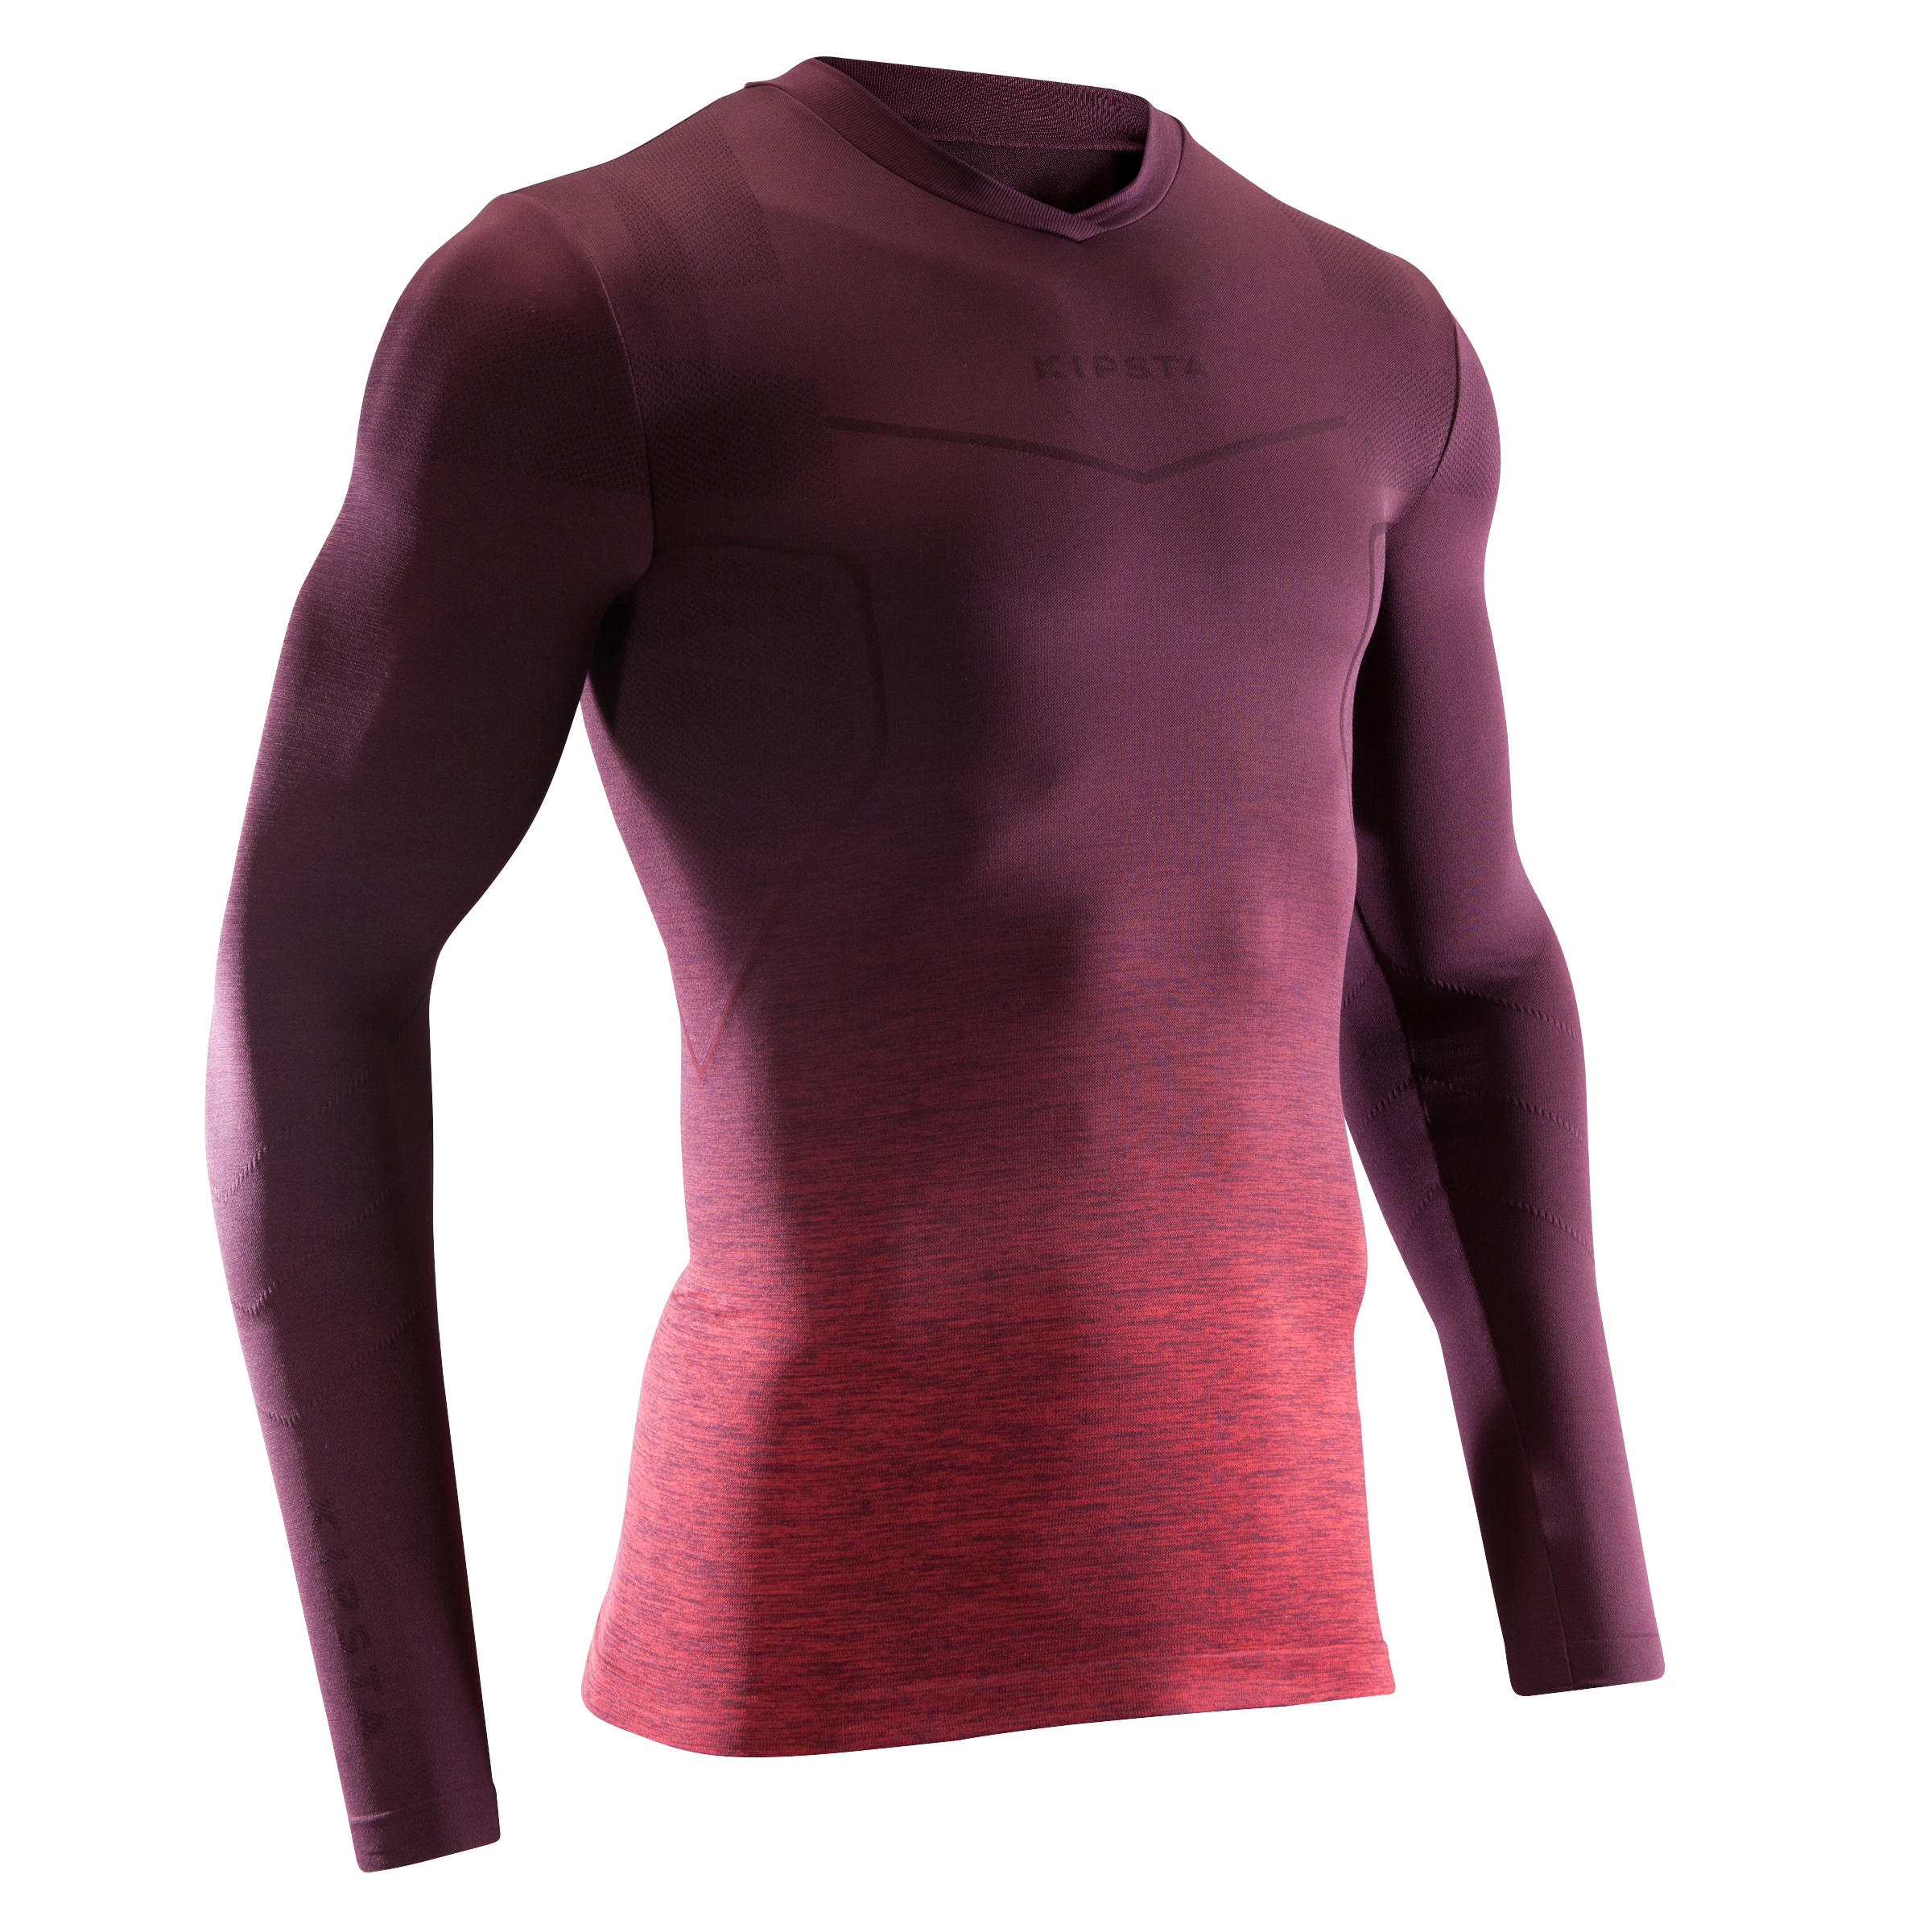 Keepdry 500 Adult Base Layer - Burgundy Ombre 1/11